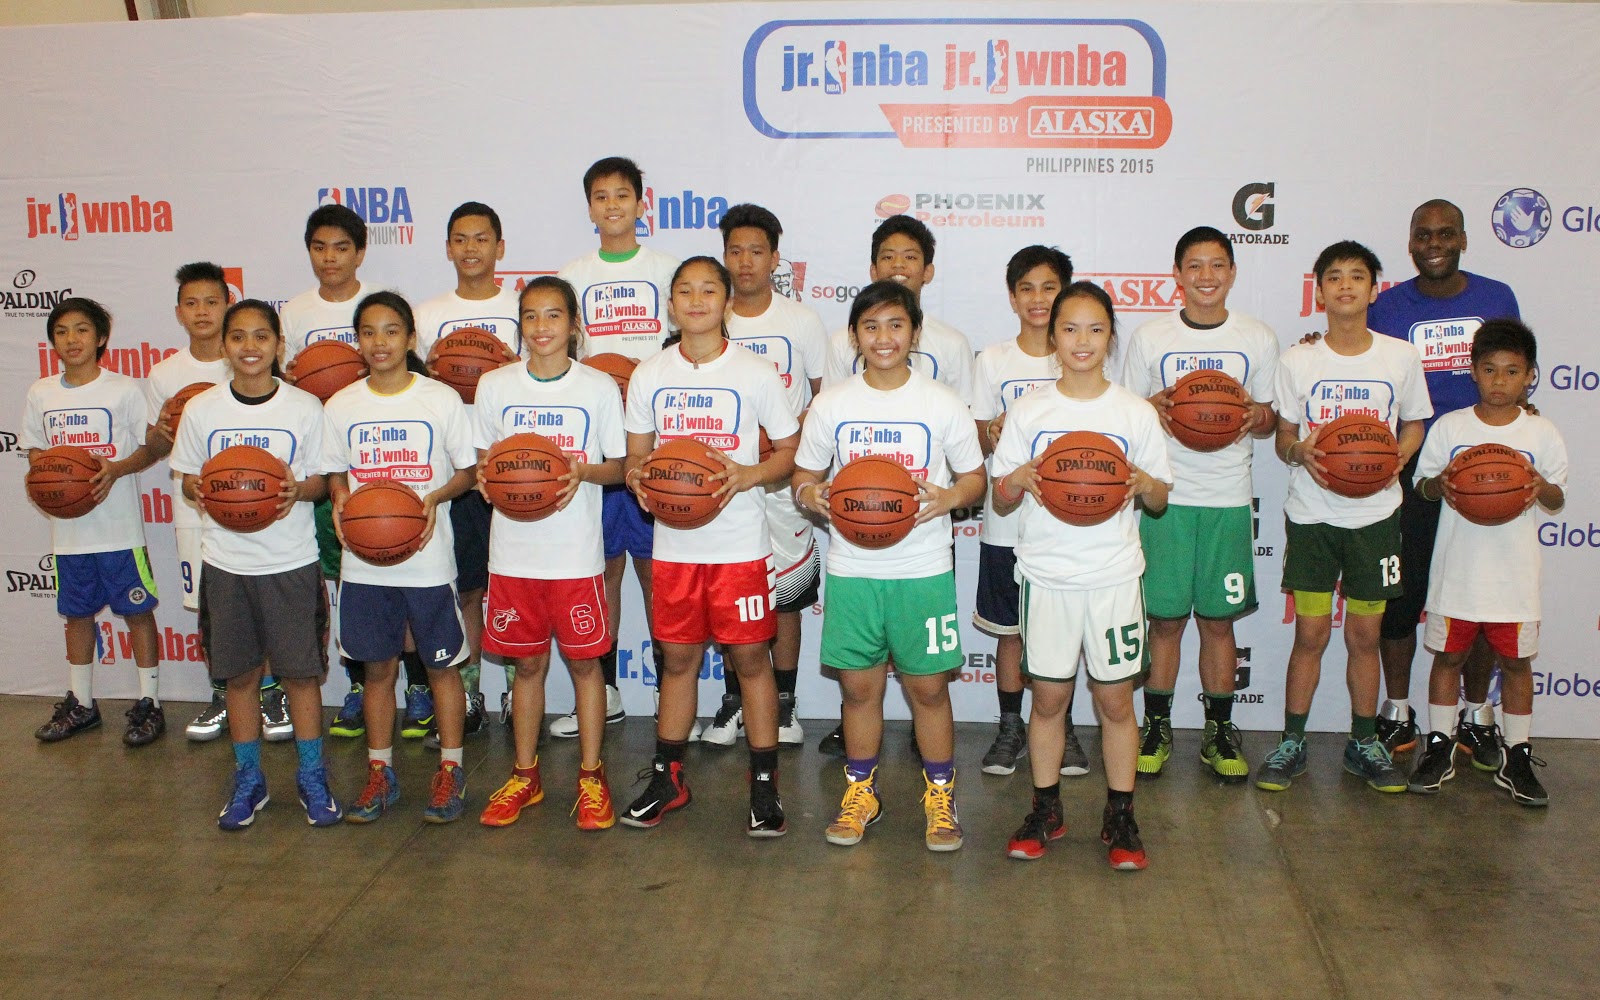 11 Boys & 6 girls Will Represent NCR at National Training Camp of Jr. NBA/Jr. WNBA Philippines 2015